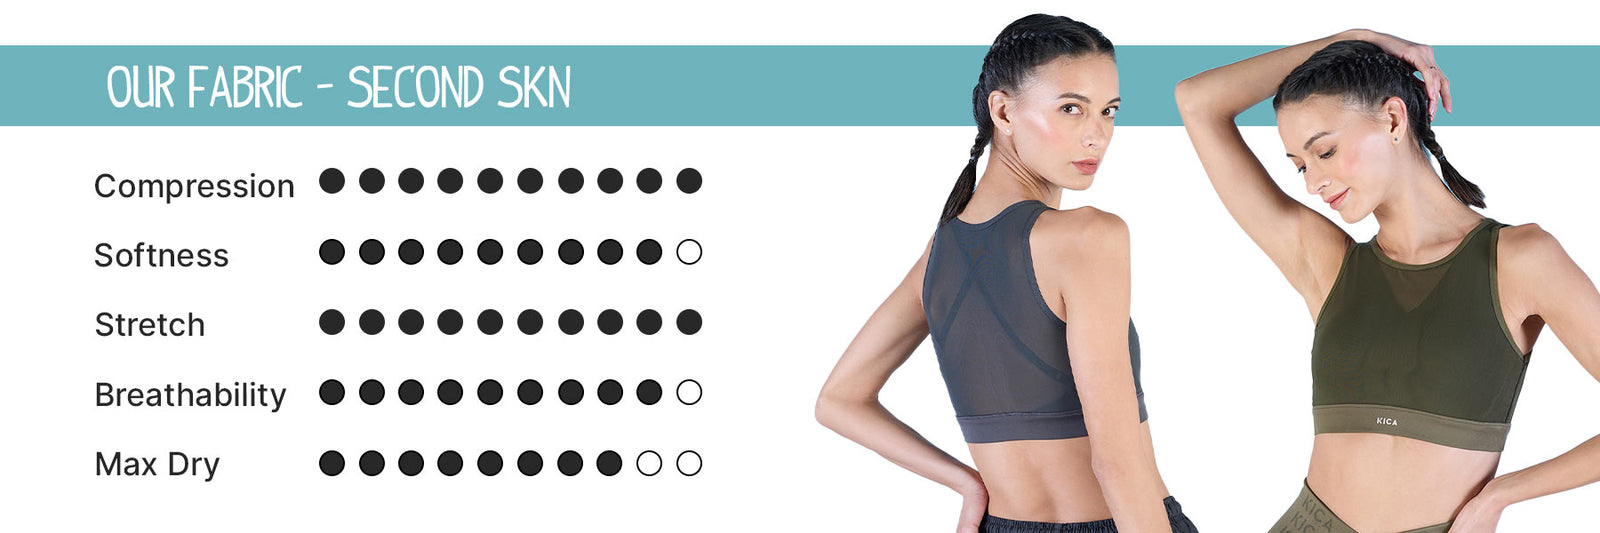 Ackee Lycra Cotton Sports Bra Manufacturer, For Daily Wear at Rs 50/piece  in New Delhi